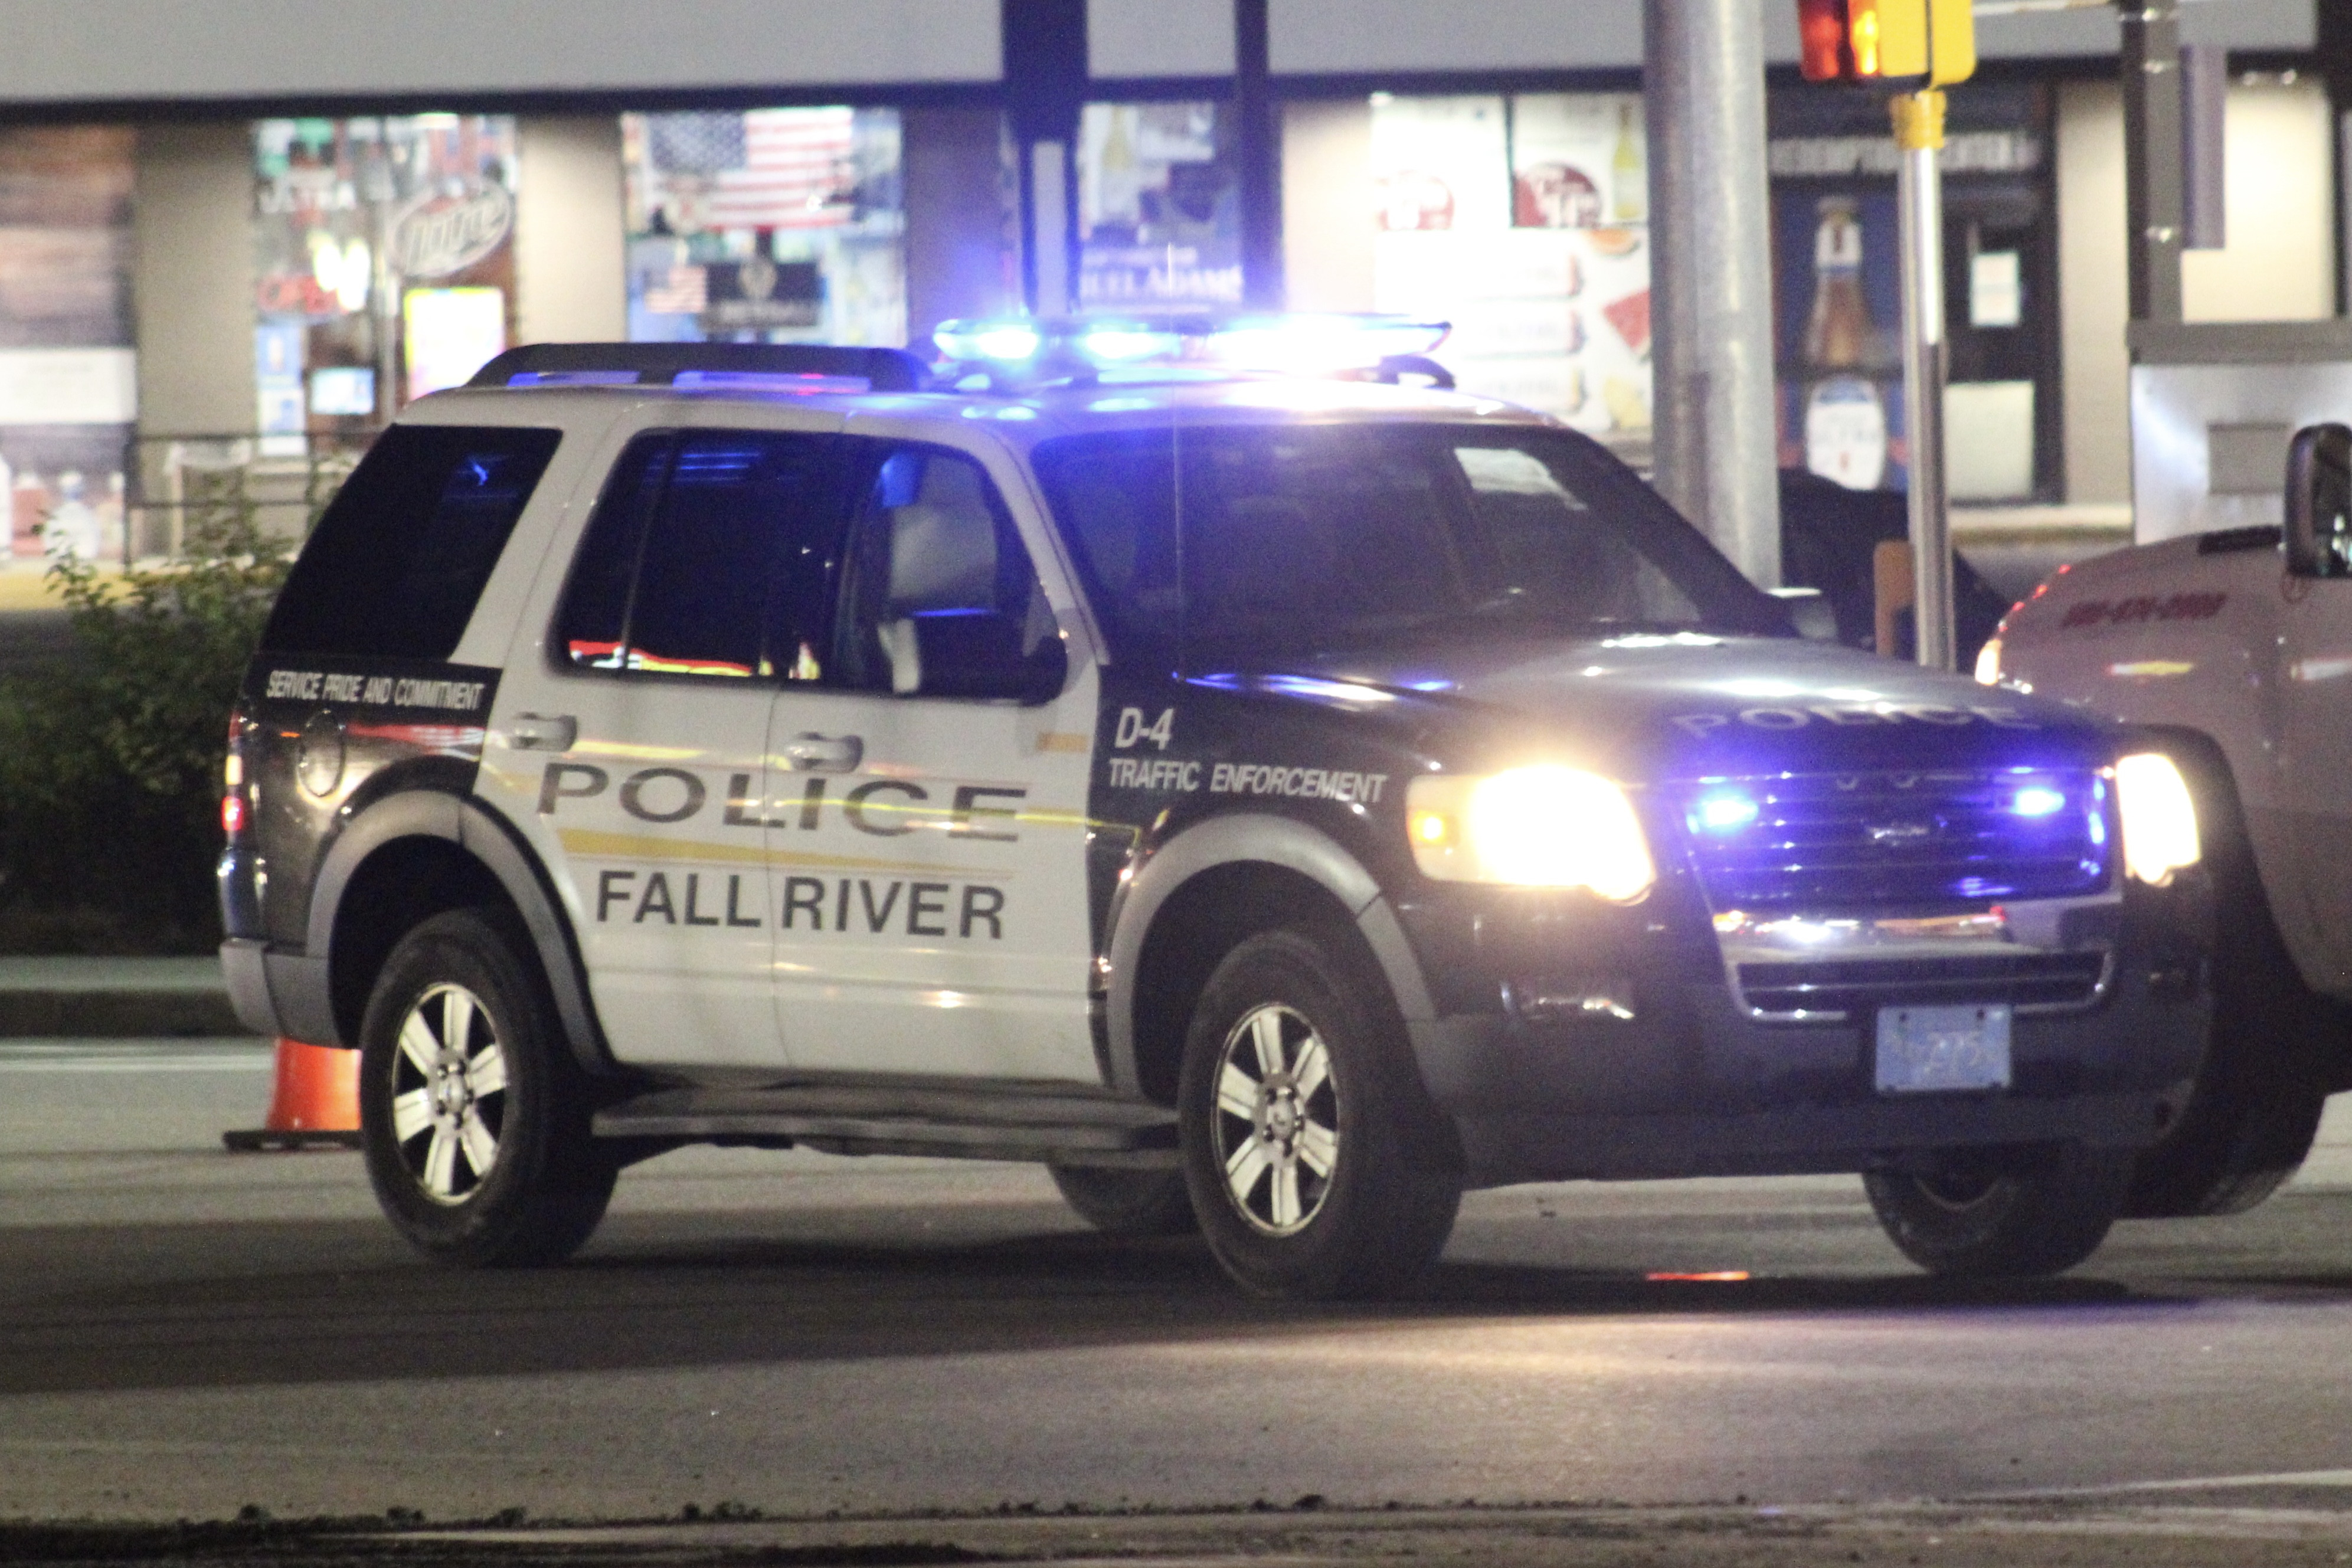 A photo  of Fall River Police
            D-4, a 2007 Ford Explorer             taken by @riemergencyvehicles